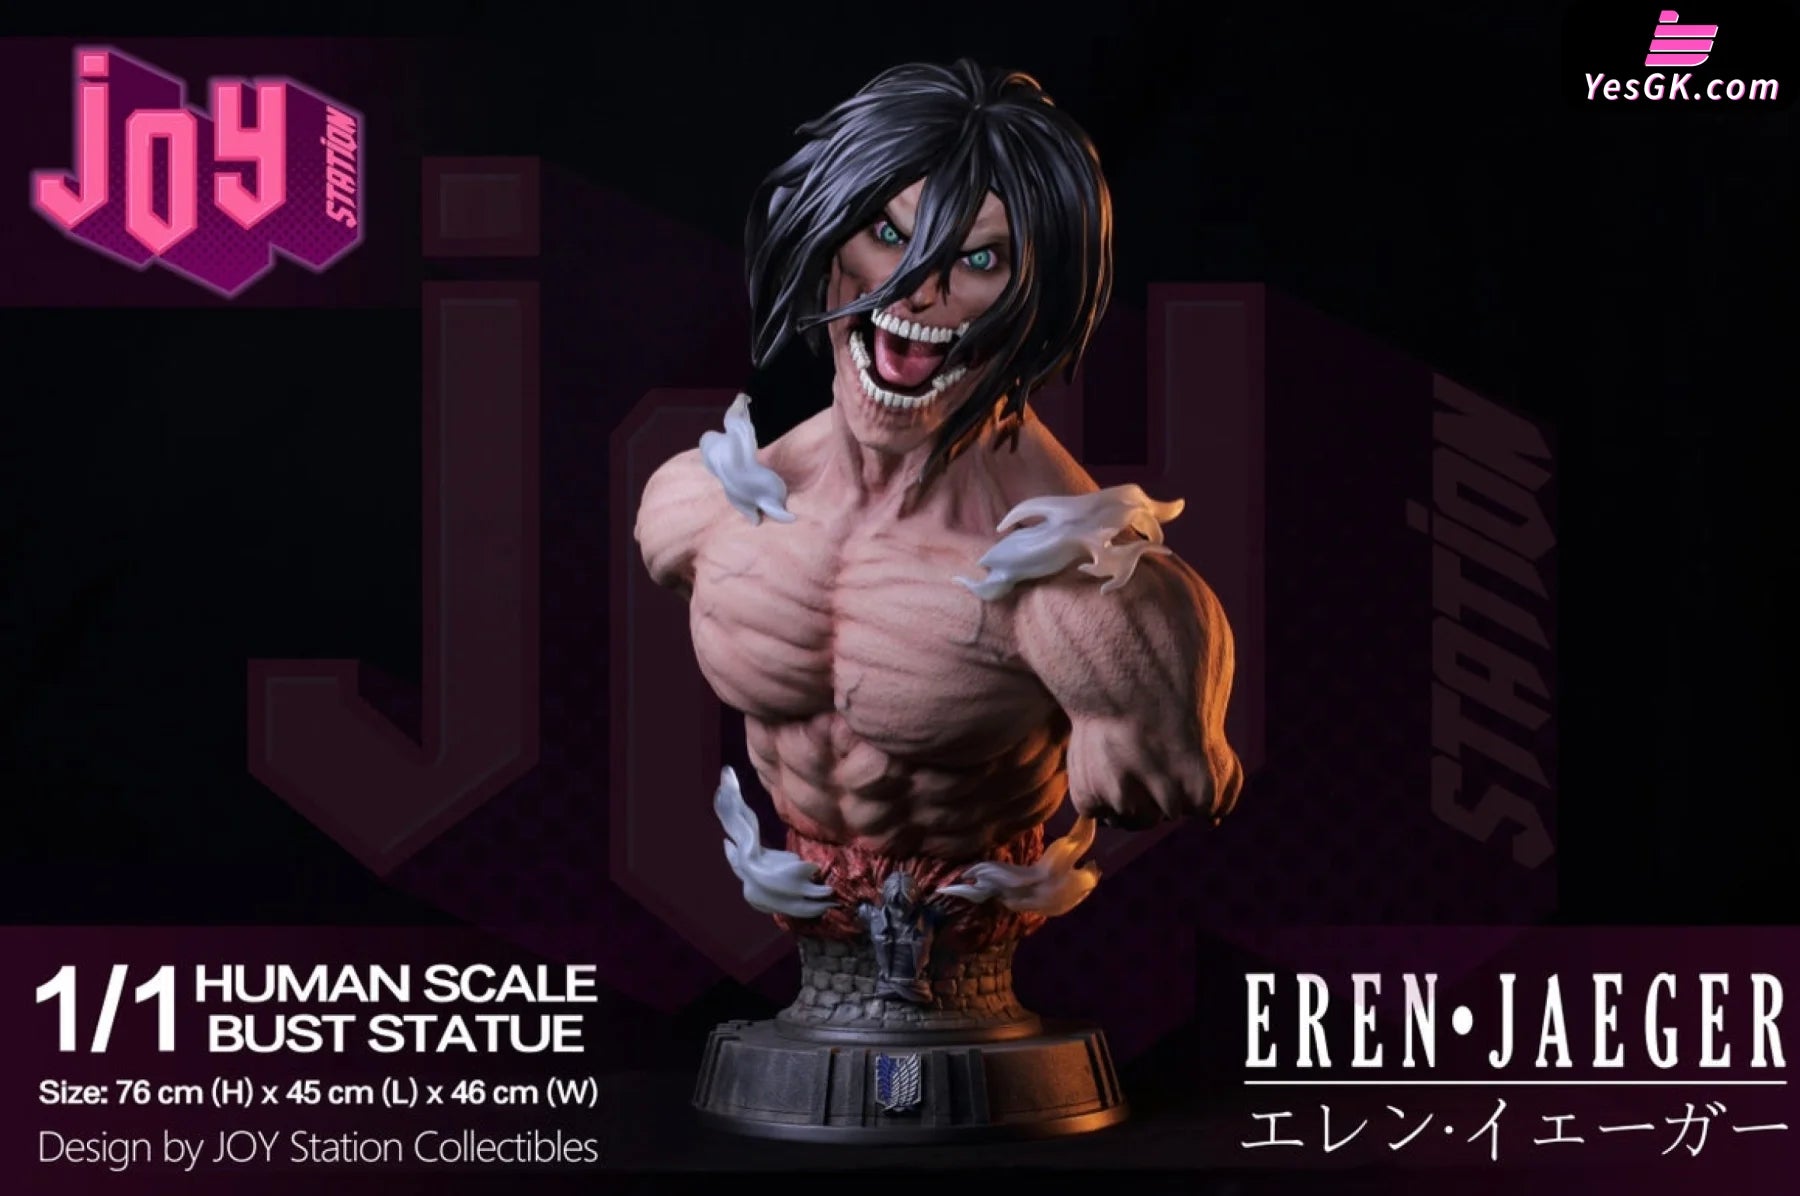 Attack on Titan Collectibles